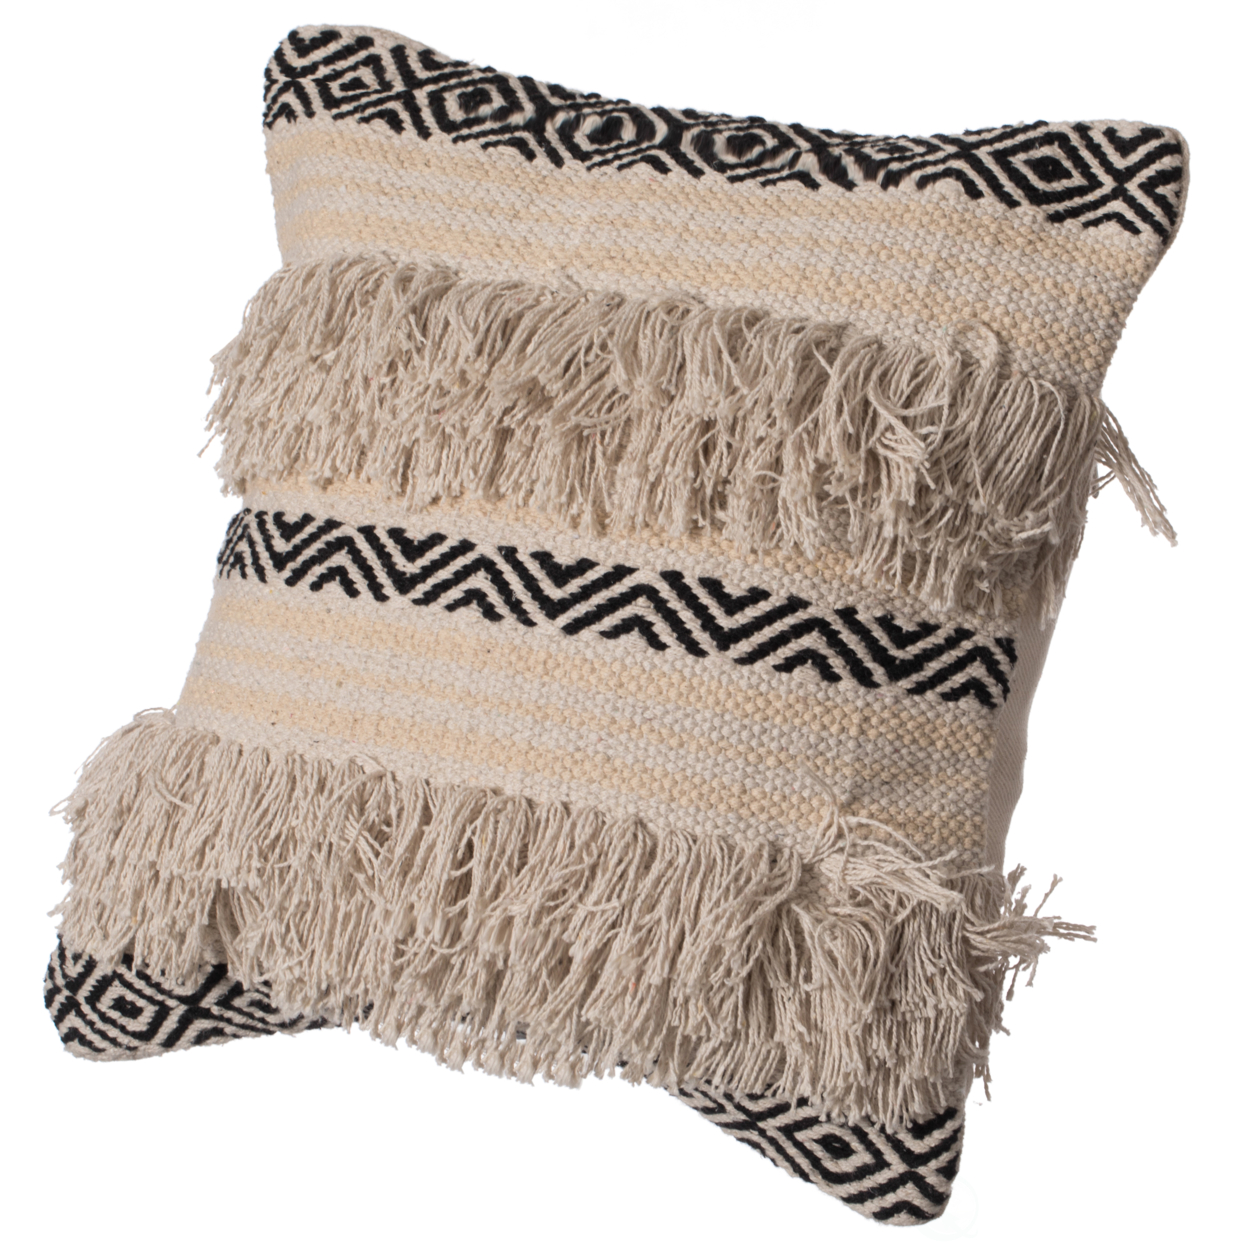 16 Handwoven Cotton Throw Pillow Cover With Boho Design And Fringed Lines - Pillowcase With Cushion